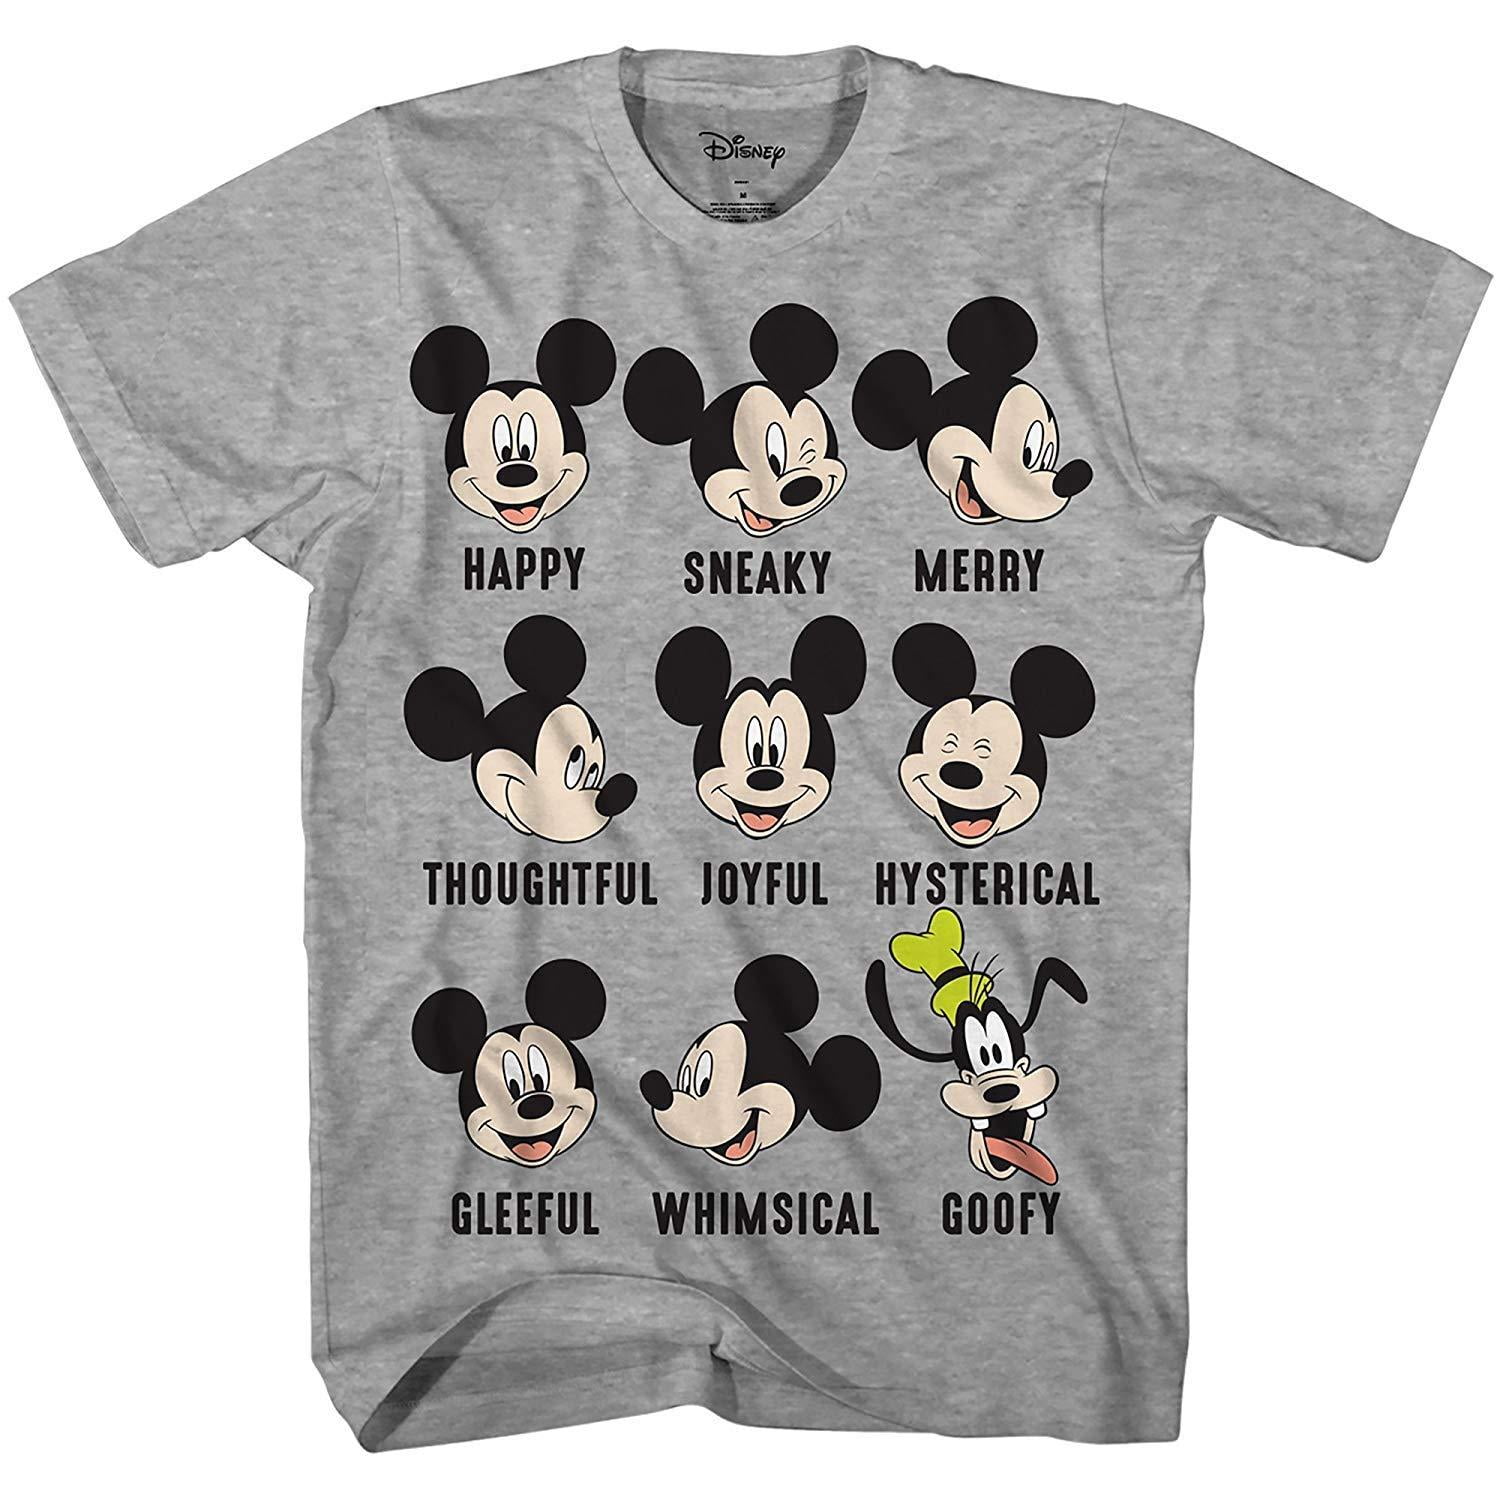 Mickey Mouse Officially Licensed Goofy Baseball Hoodie Heather Grey - Black 